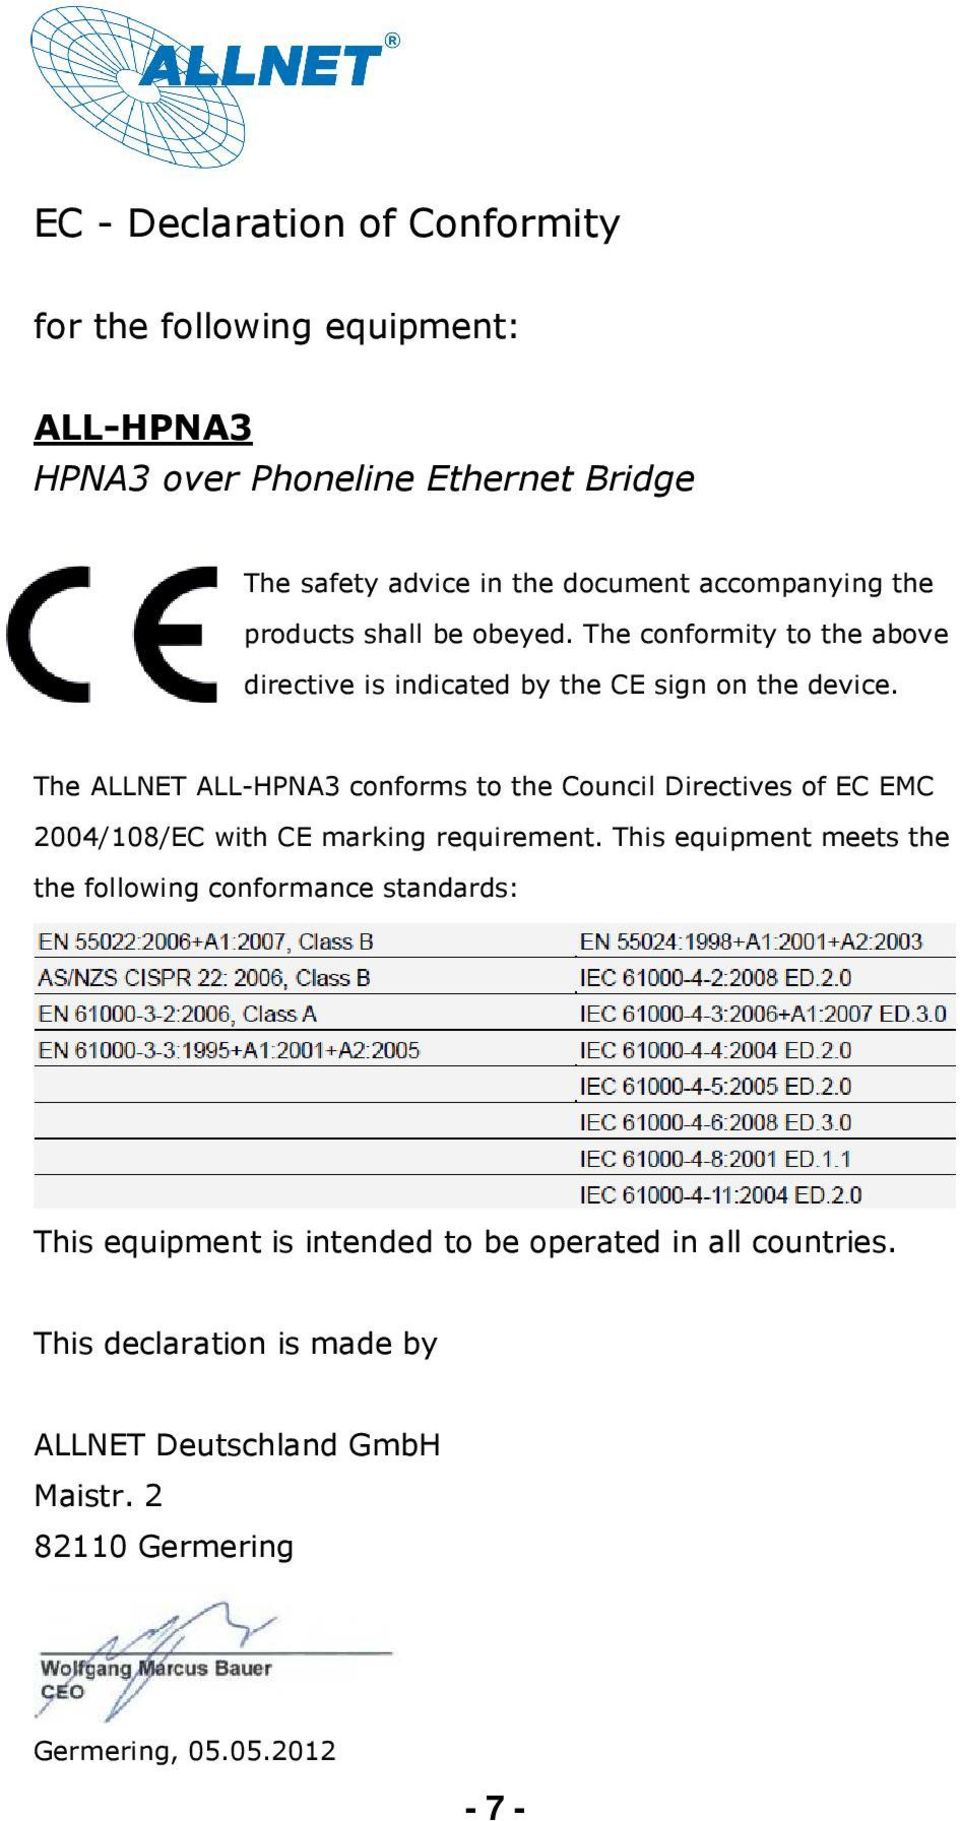 The ALLNET ALL-HPNA3 conforms to the Council Directives of EC EMC 2004/108/EC with CE marking requirement.